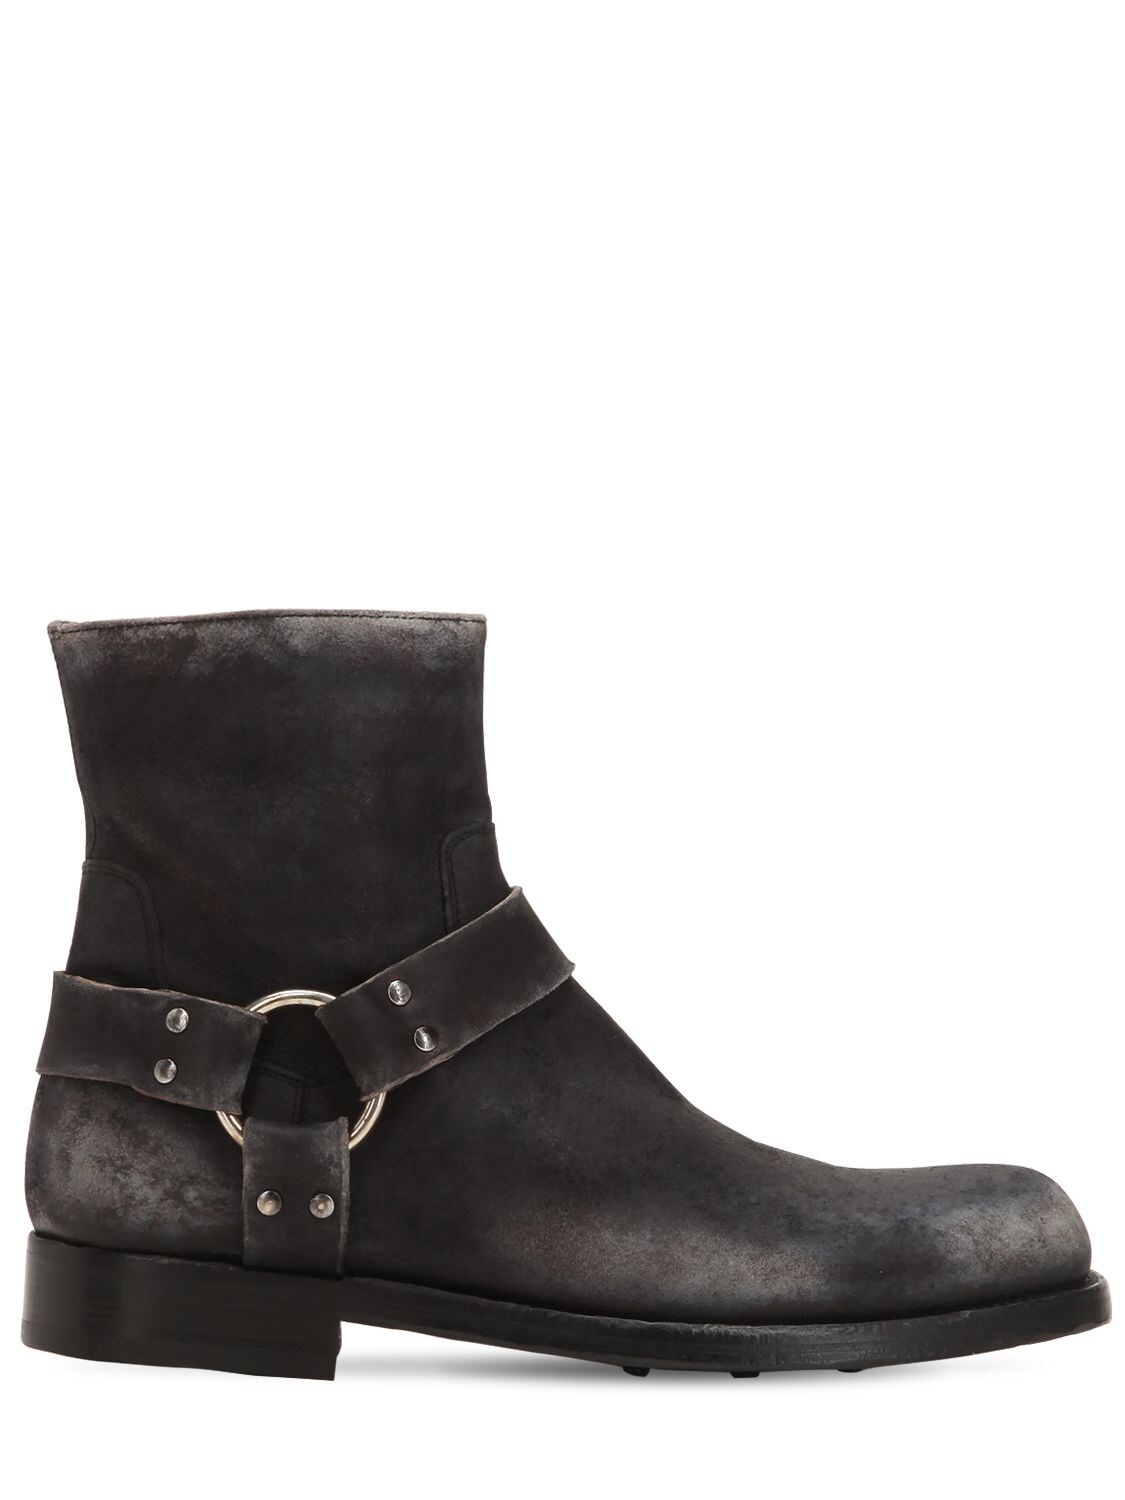 Officine Creative Asher 006 Distressed Leather Boots In Black